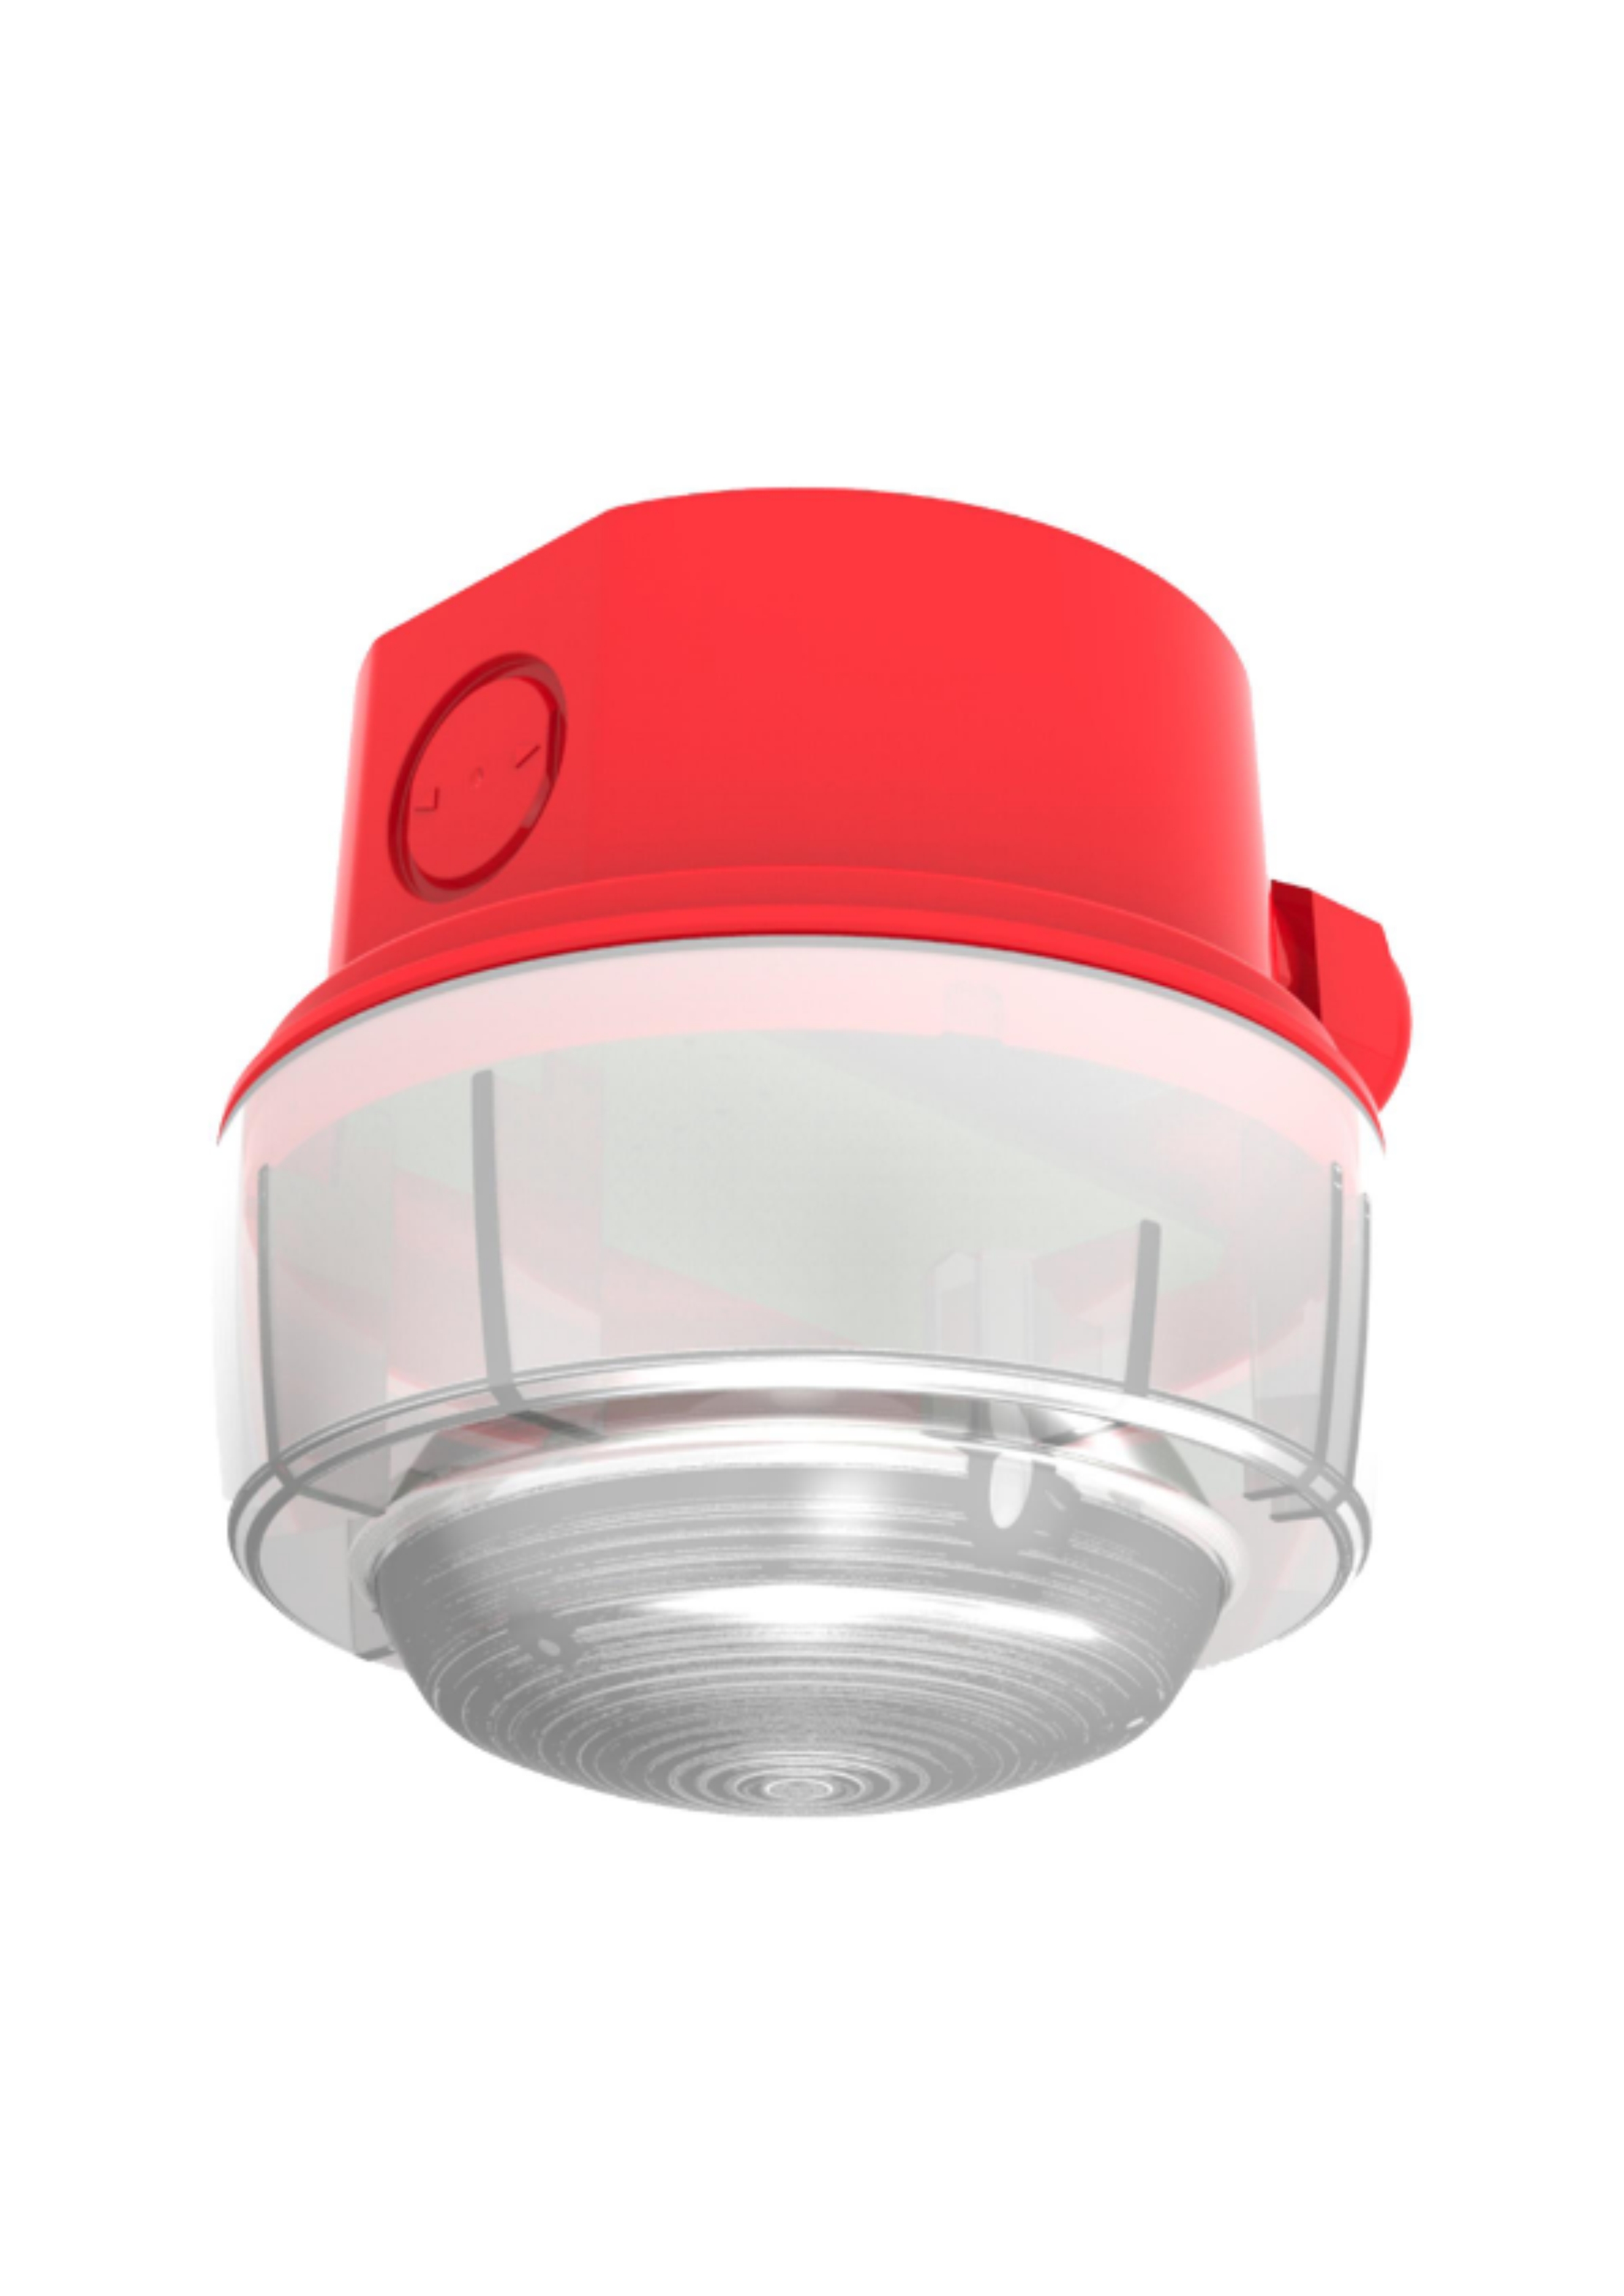 Conventional Beacon - Red case, white LEDs (IP65) ...